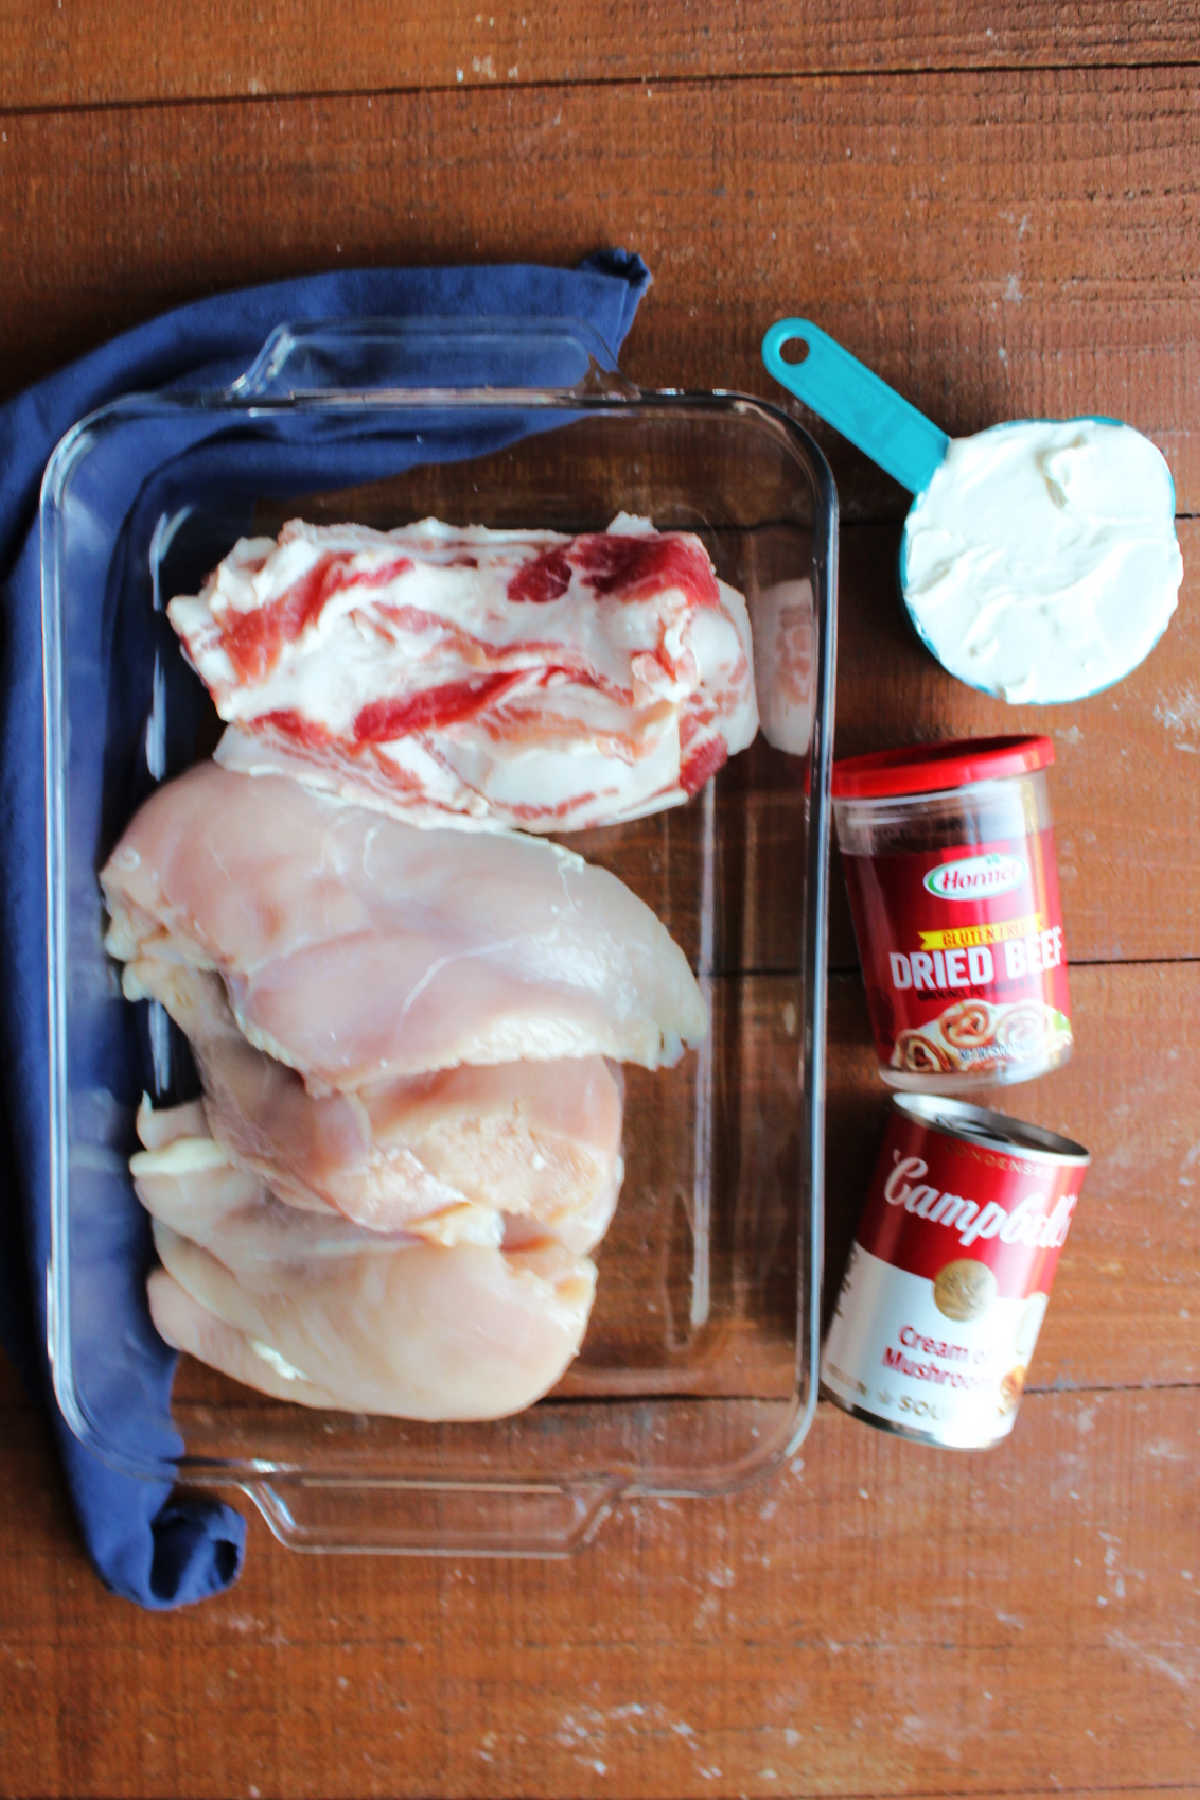 Ingredients including boneless skinless chicken breasts, bacon, dried beef, cream of mushroom soup, and sour cream.